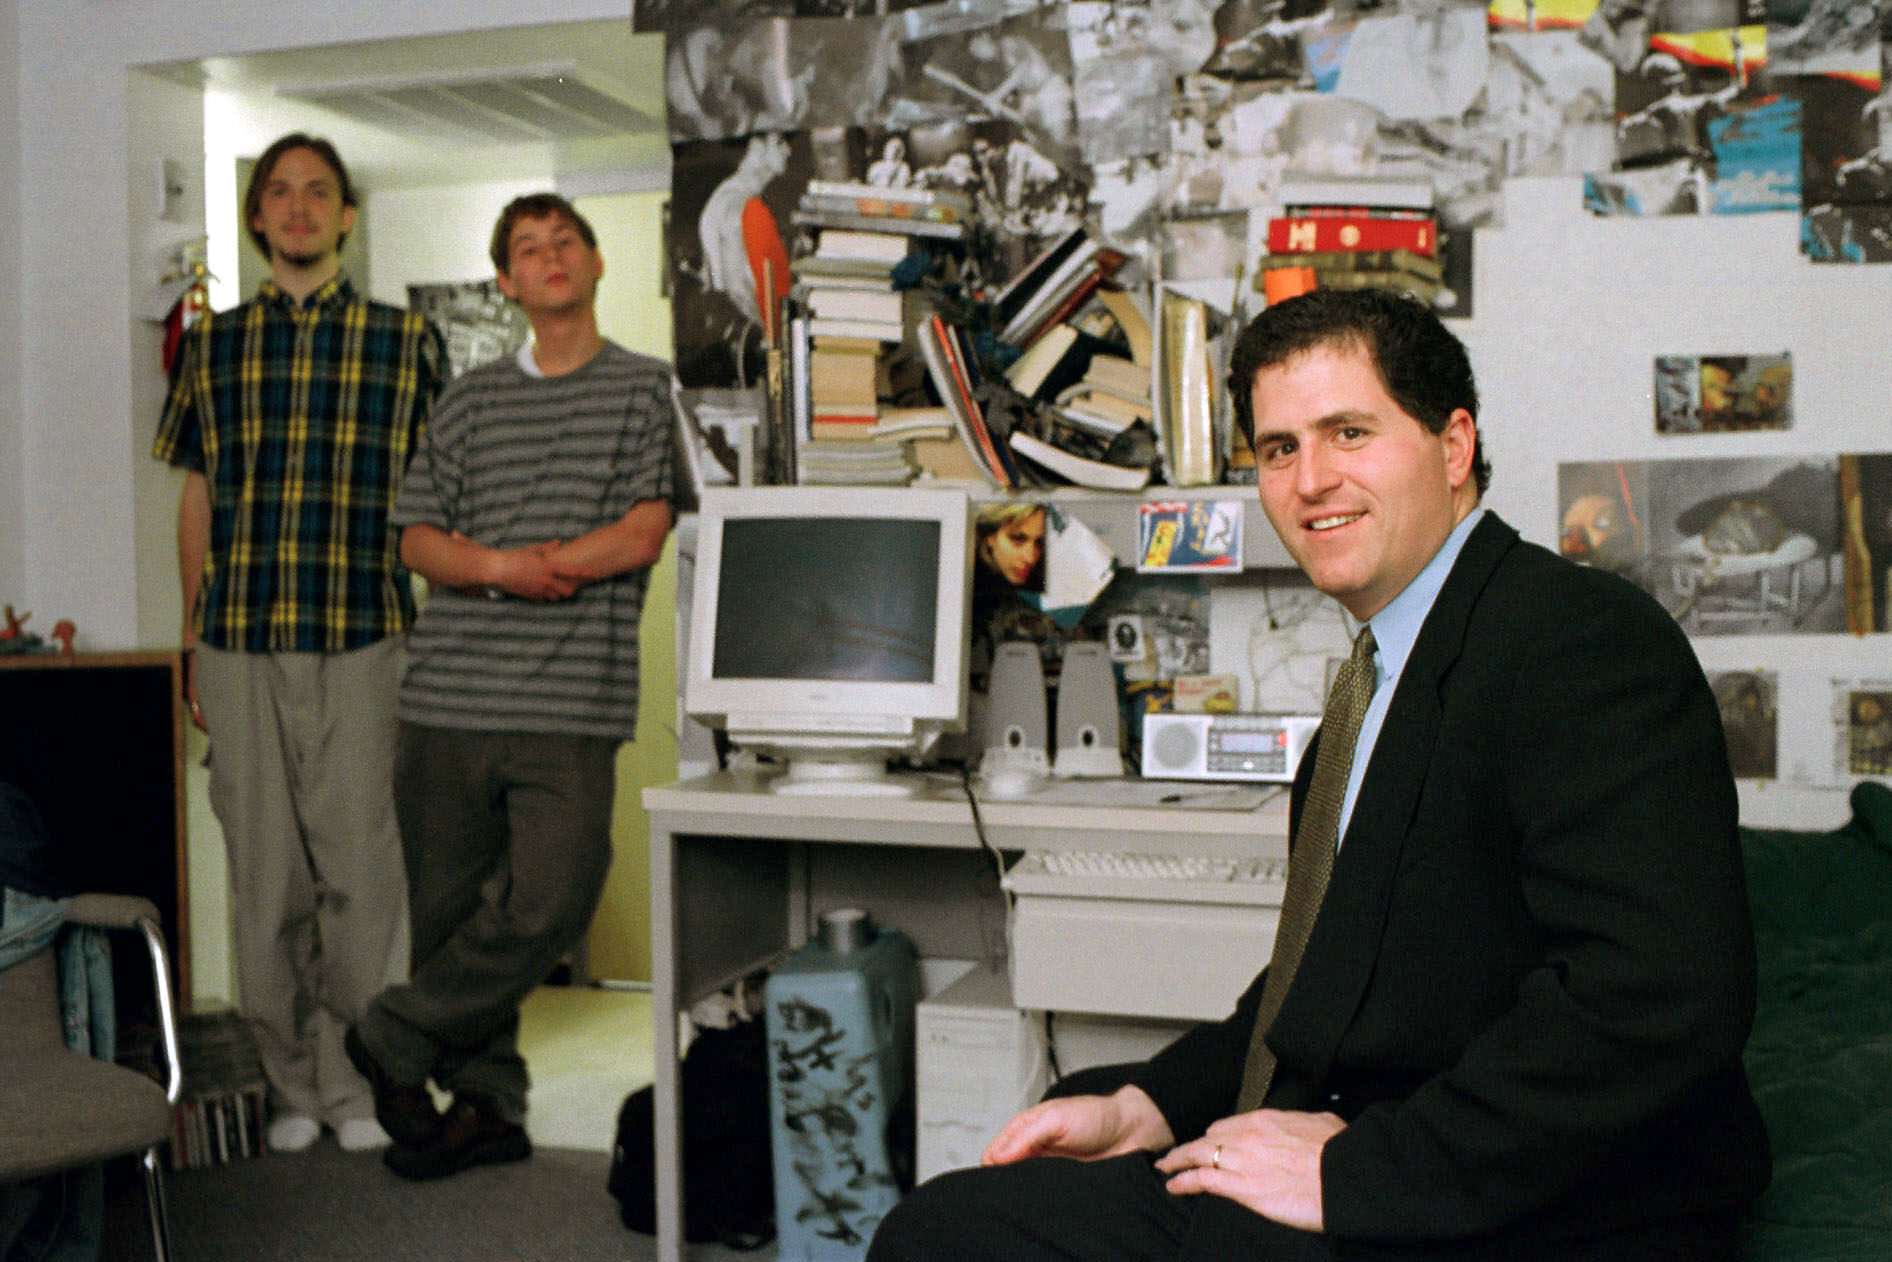 As the room's new occupants stand by, Michael Dell revisits the University of Texas dorm room where he started his company in 1984. (AP Images/Harry Cabluck)